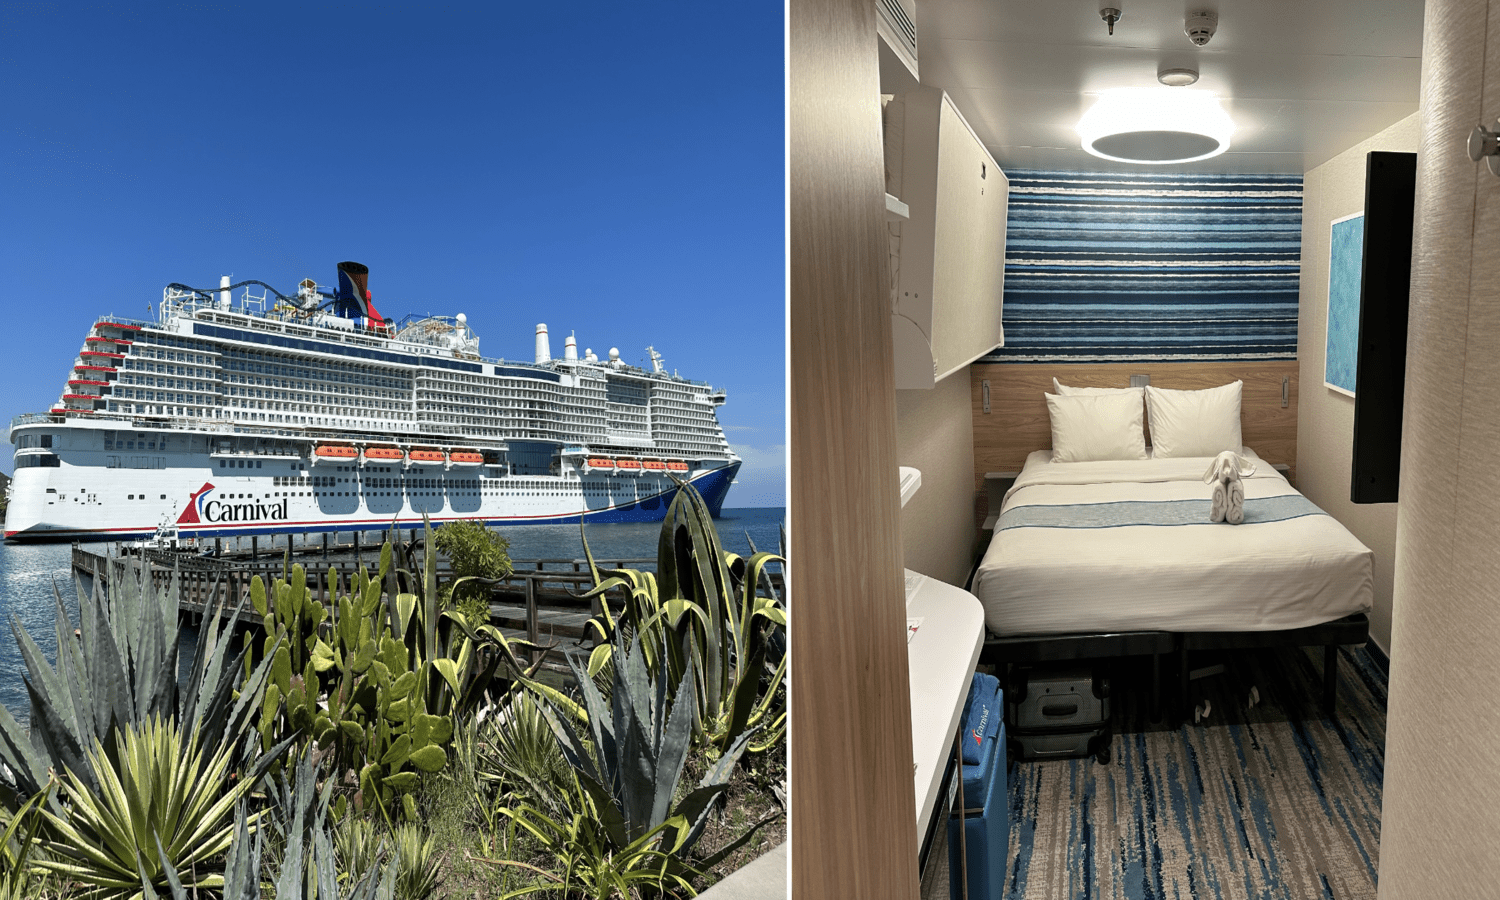 I stayed in a windowless cabin onboard Carnival Celebration that